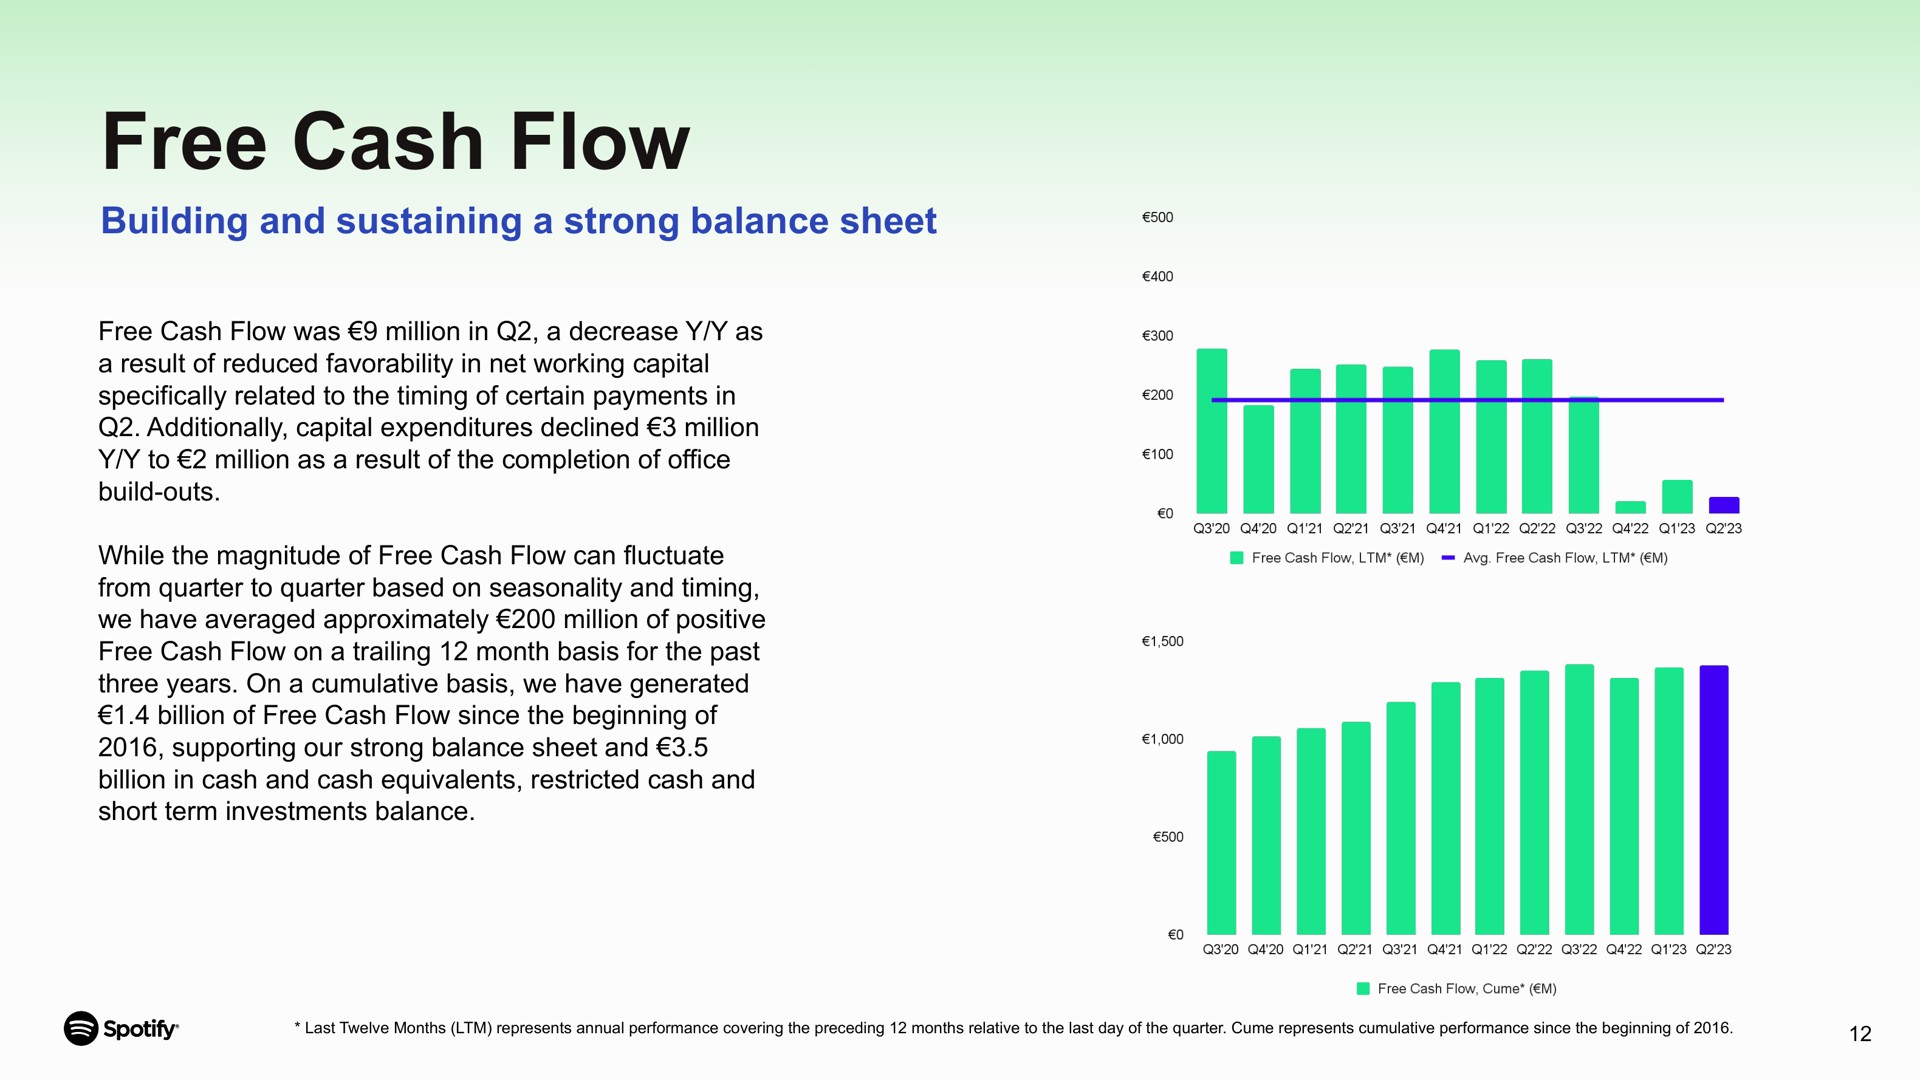 free cash flow building and sustaining a strong balance sheet was million in decrease as result of reduced in net working capital specifically related to the timing of certain payments in additionally capital expenditures declined million build outs while the magnitude of can fluctuate on trailing month basis for the past three years on cumulative basis we have generated billion of since the beginning of supporting our short term investments | Spotify